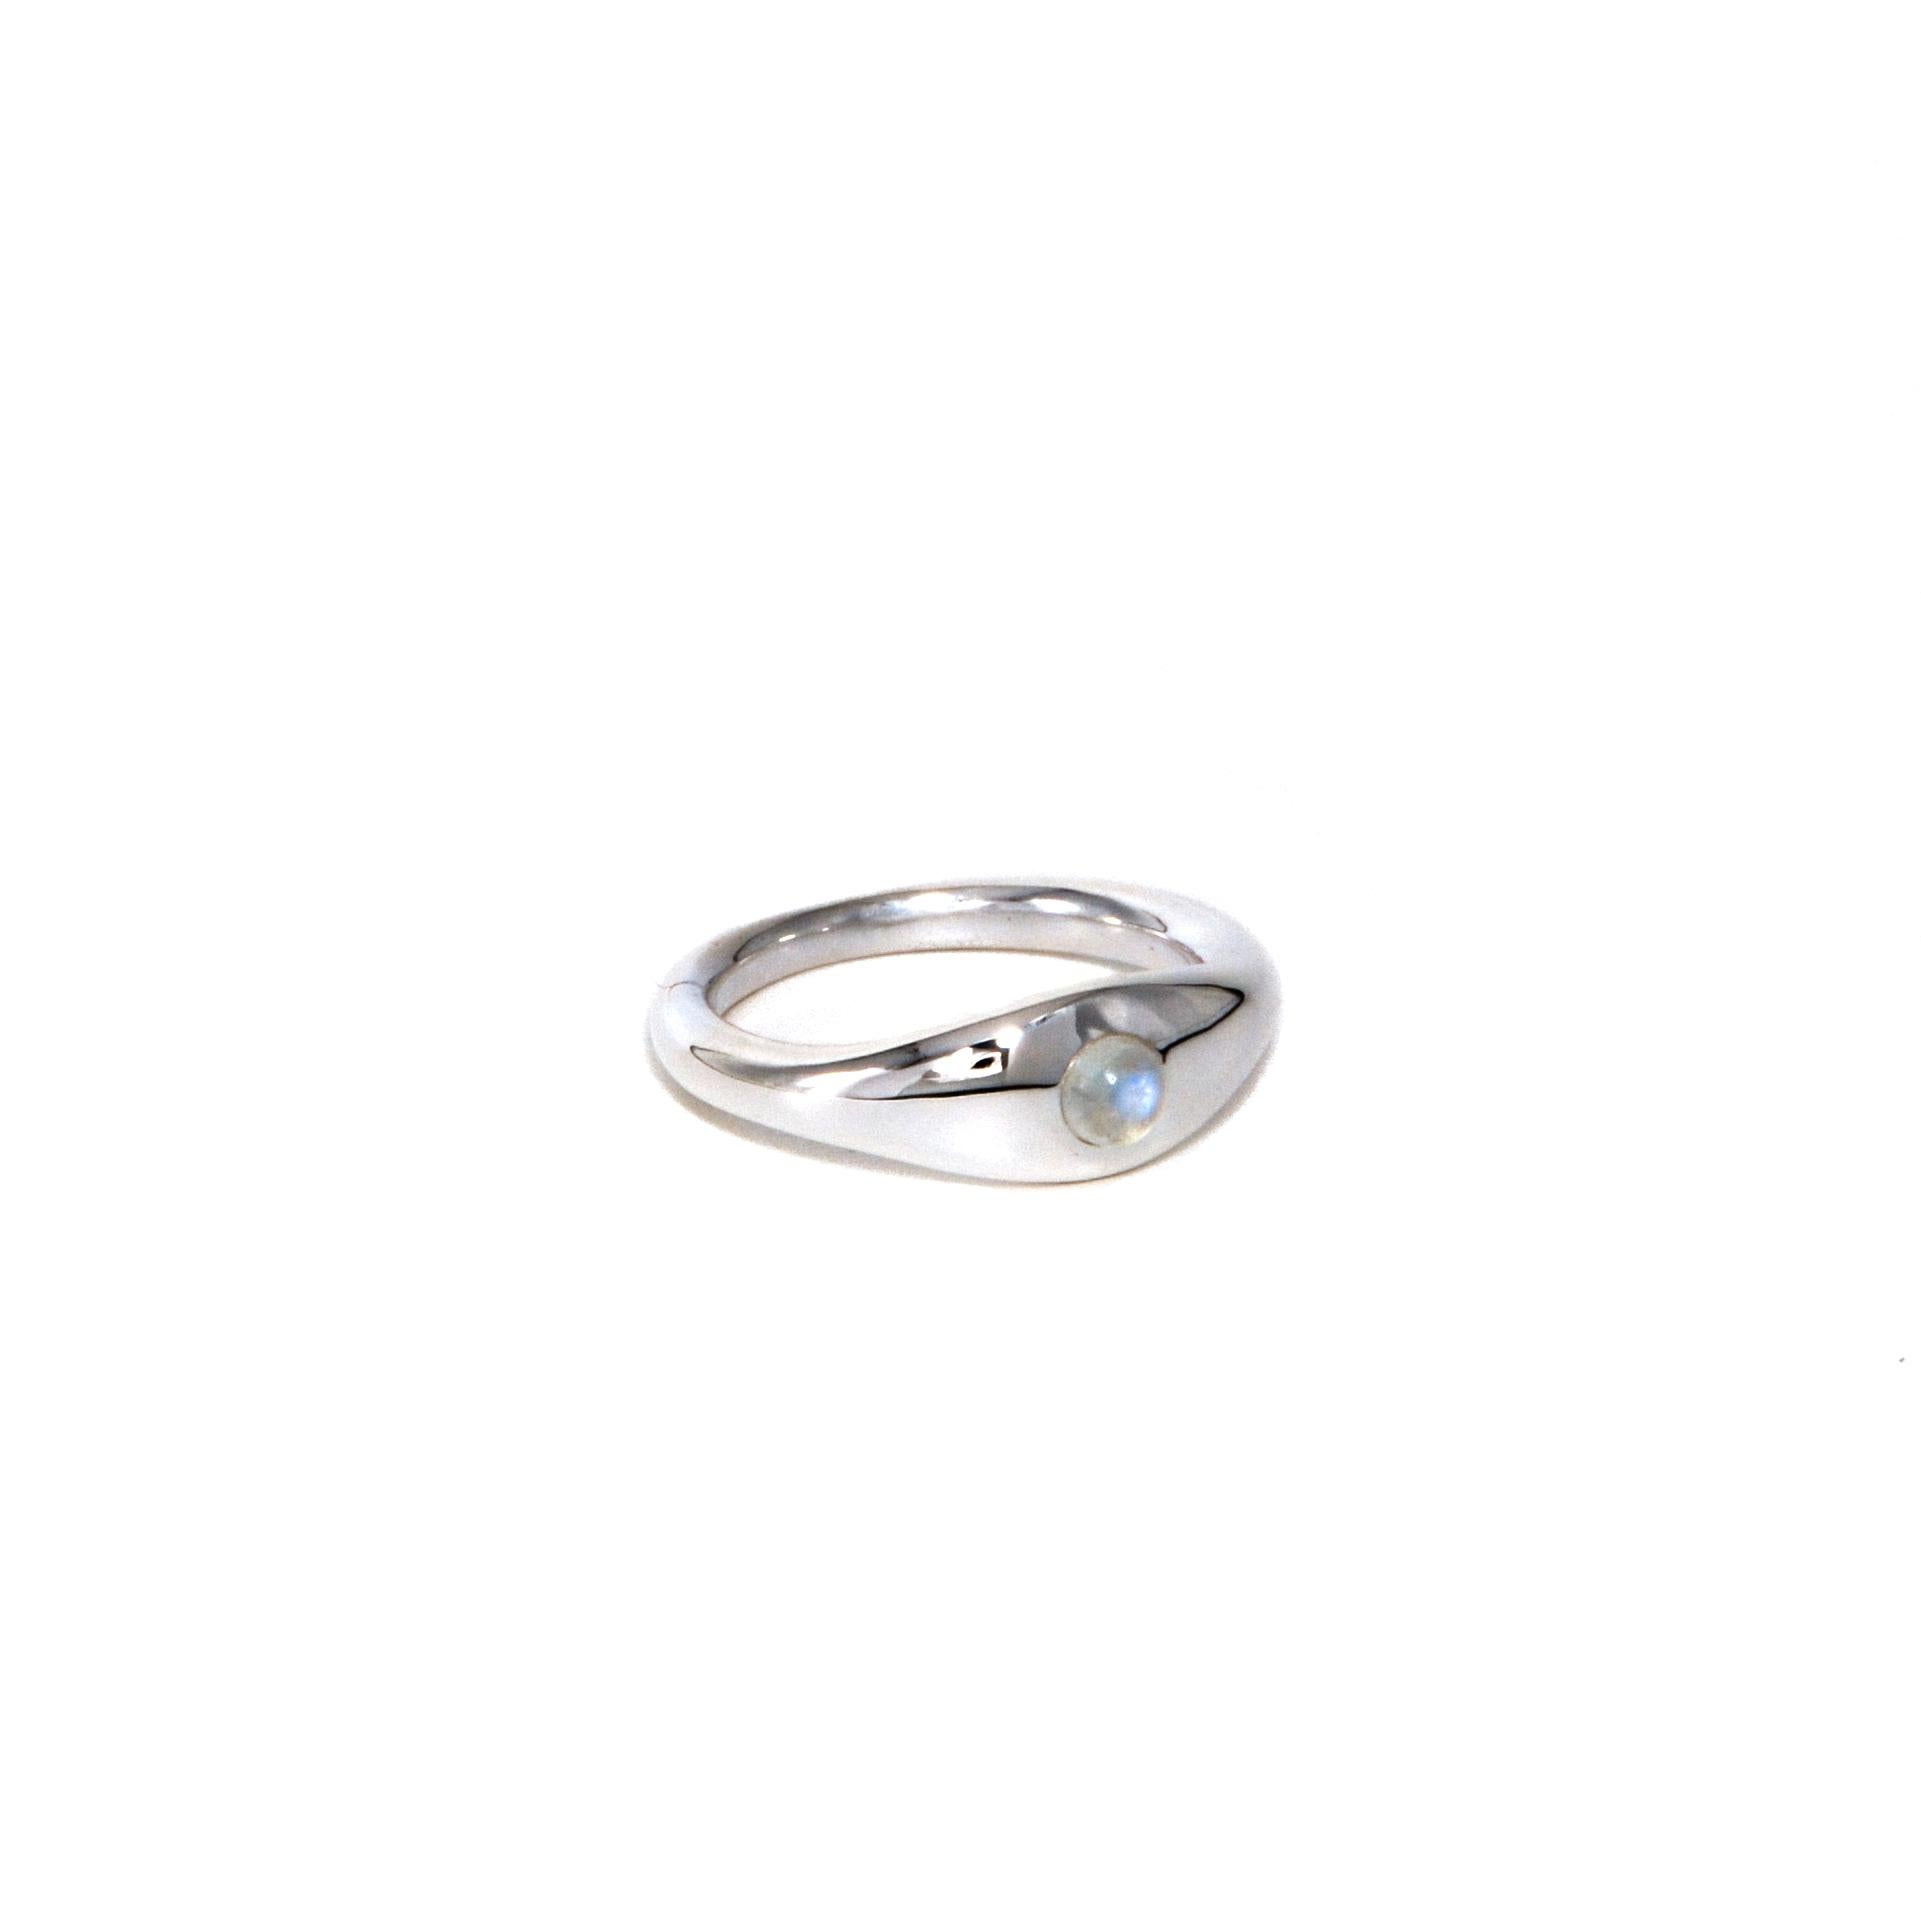 For Sale:  Ruth Nyc Lun Ring, 14k White Gold and Moonstone Ring 3